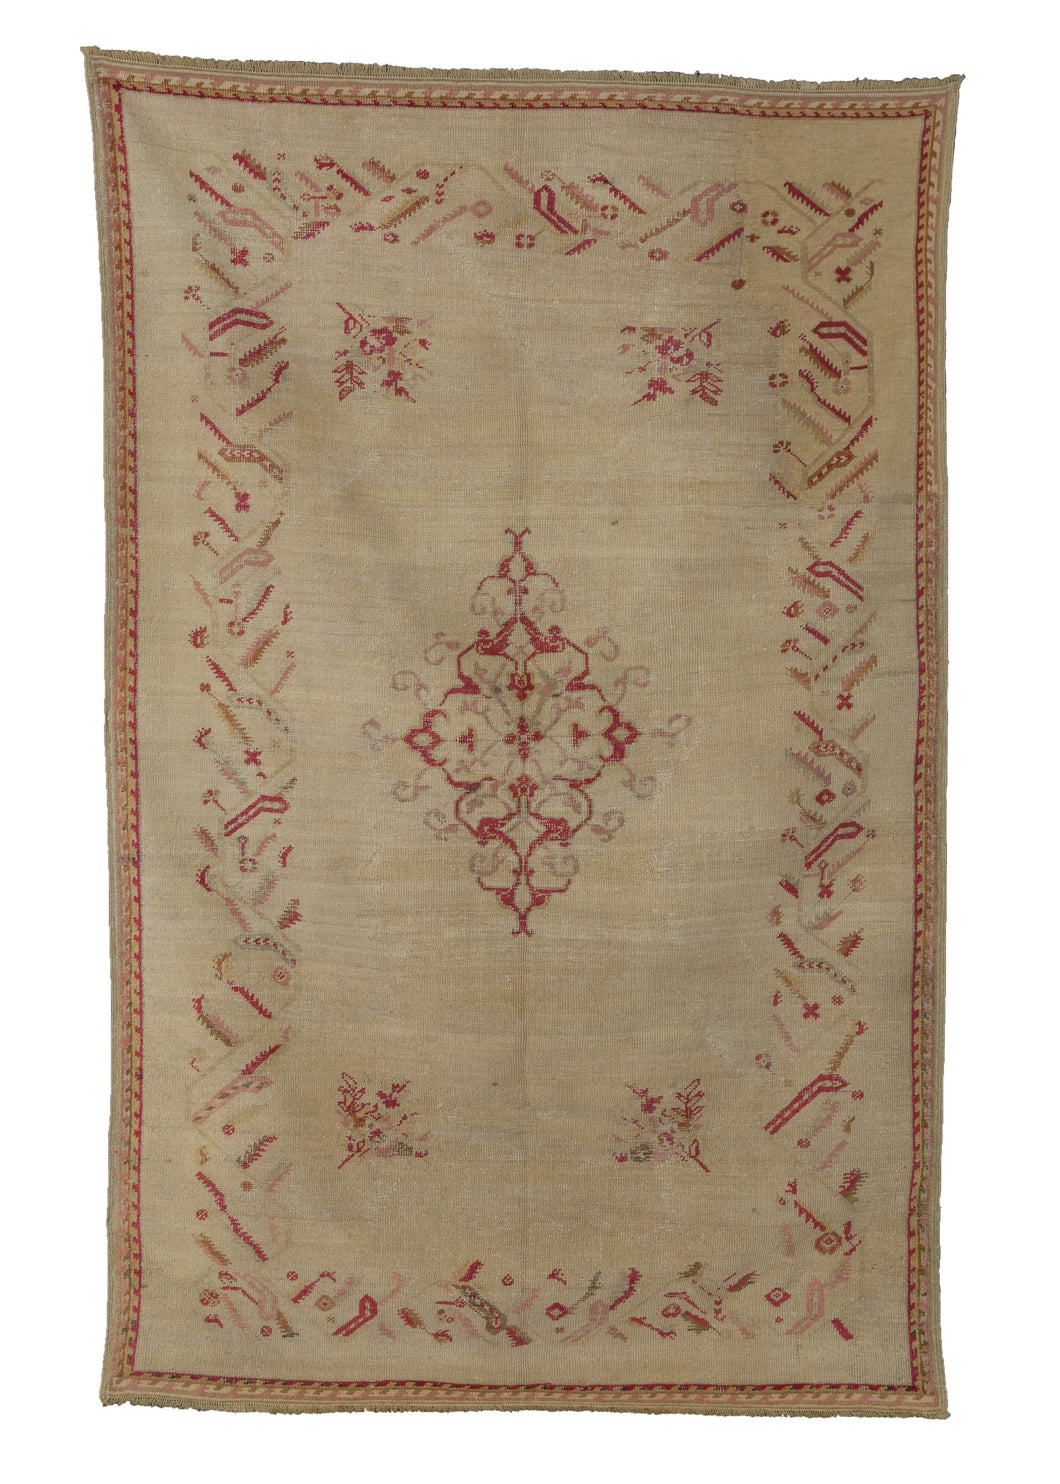 Central Anatolian Rug with cochineal dye